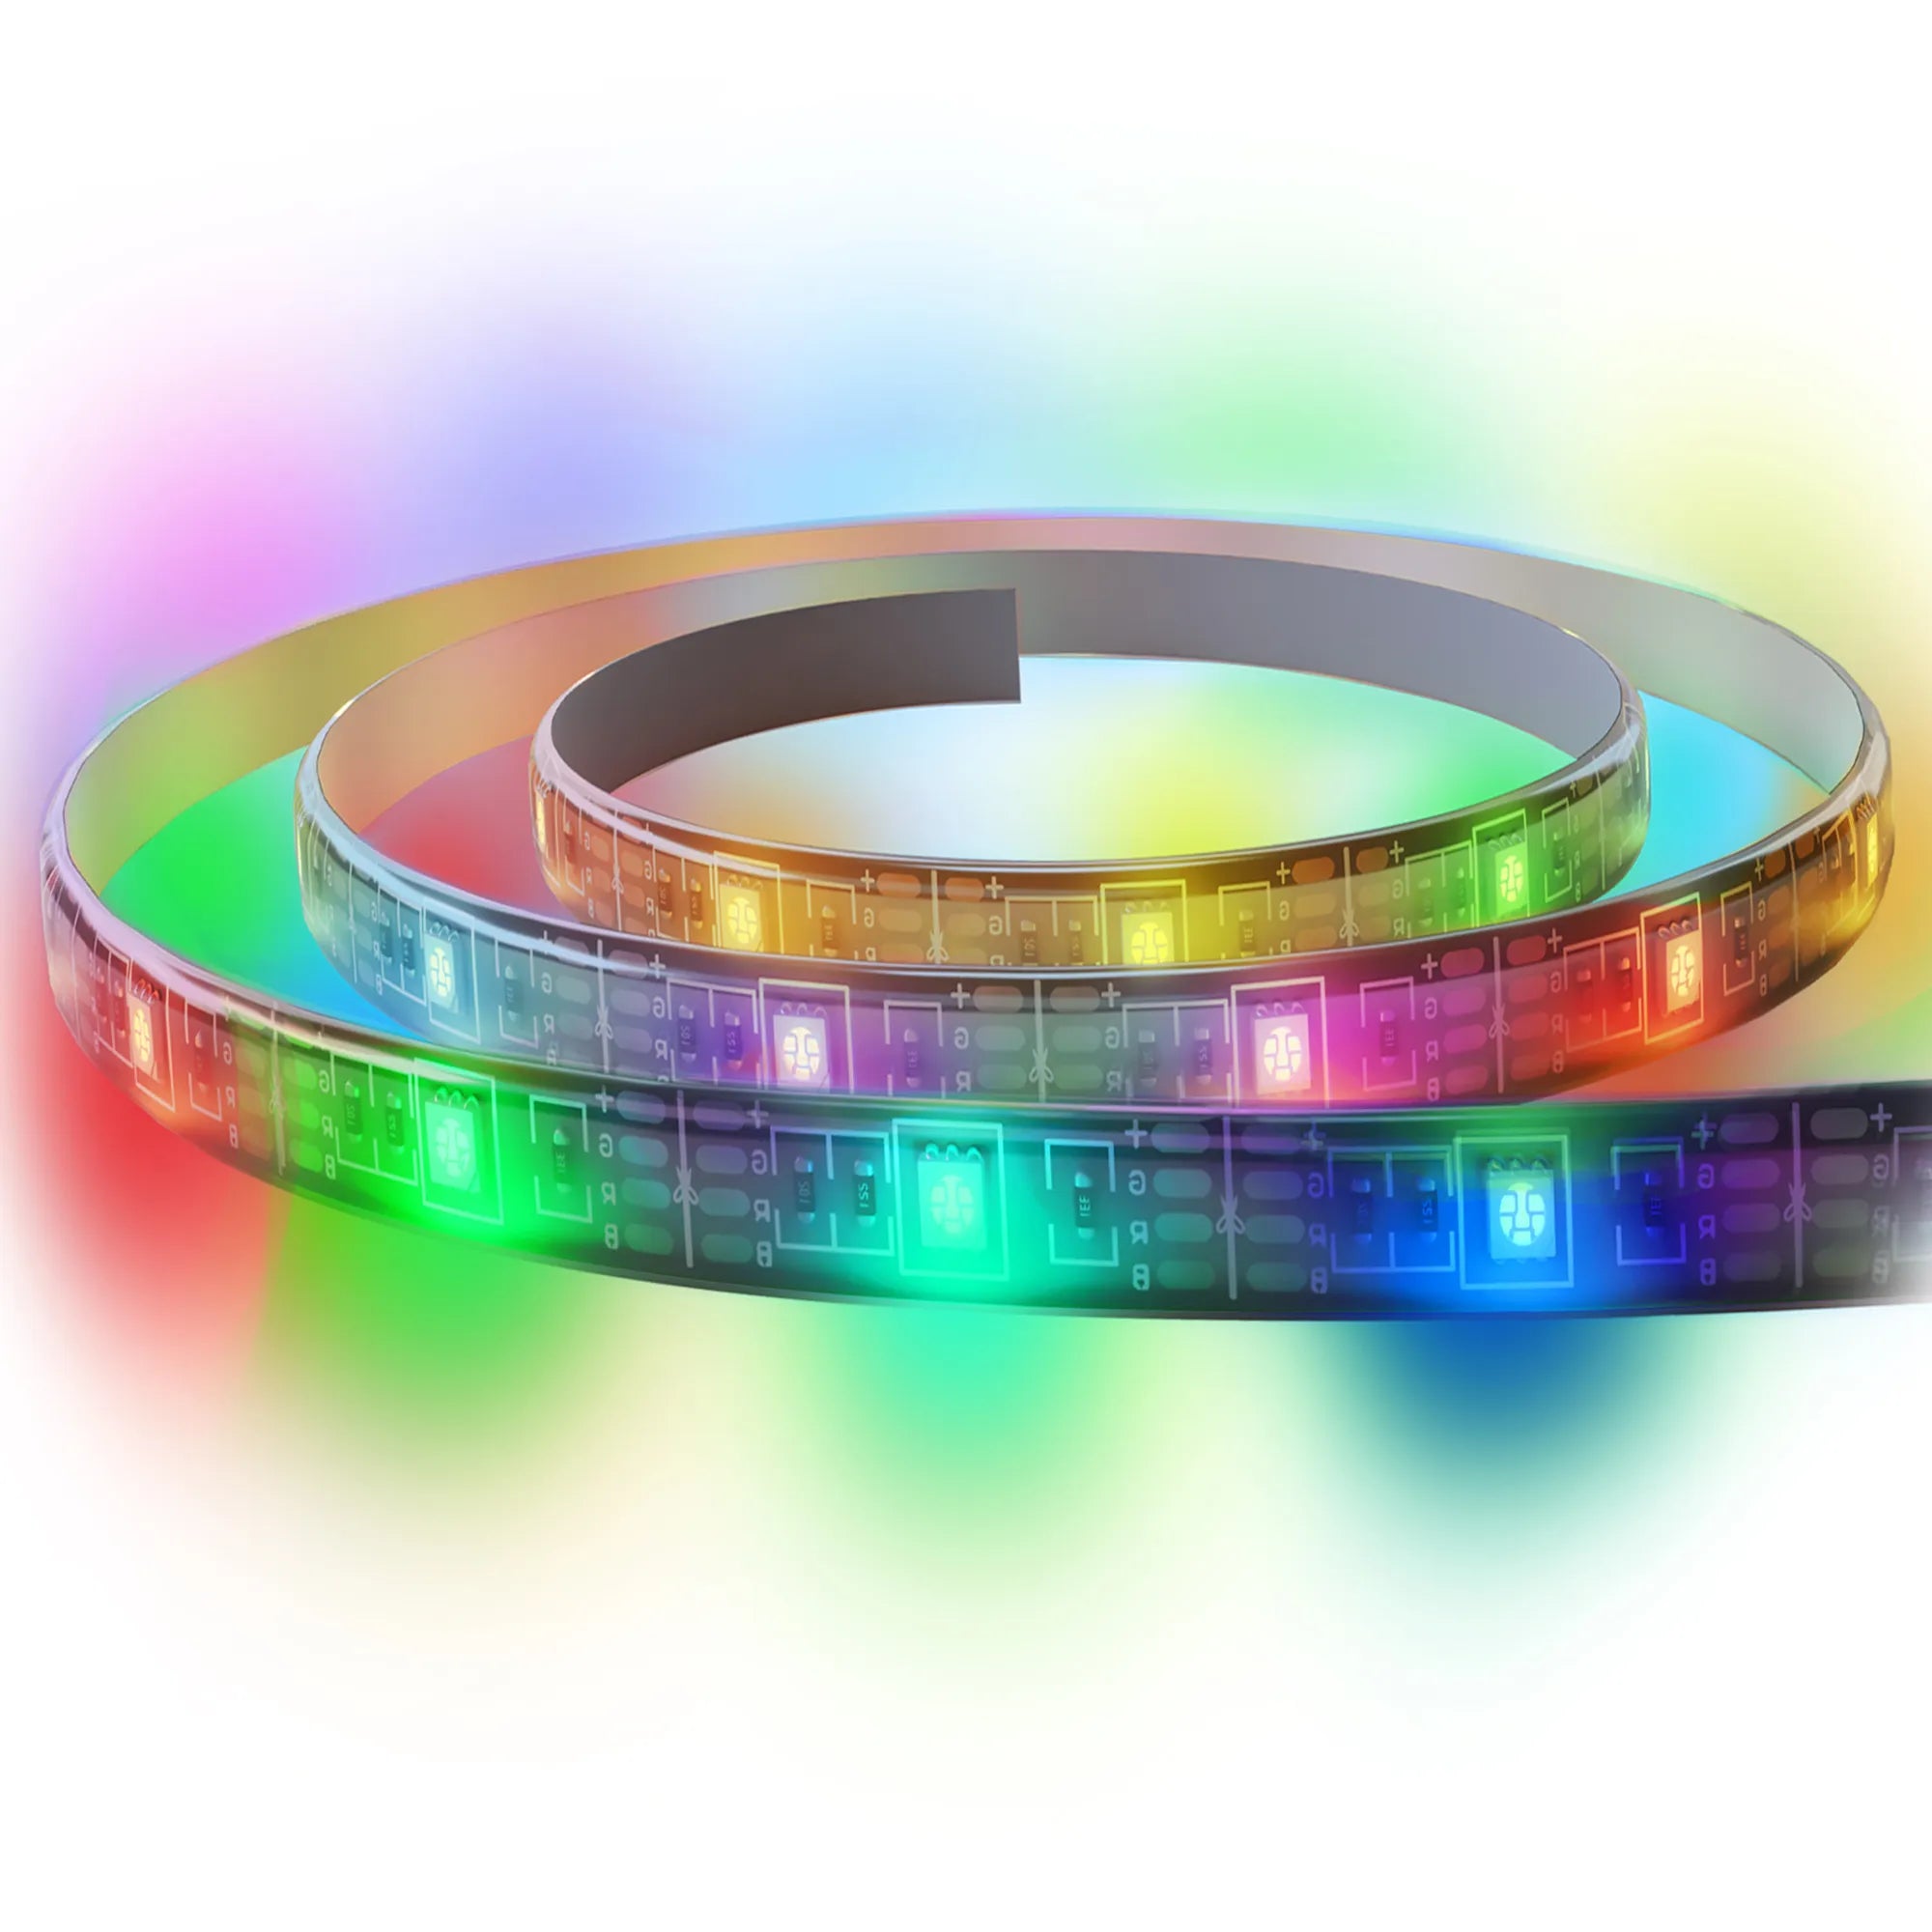 MONSTER LED FLOW Multi Color RGB + IC LED light strip with remote